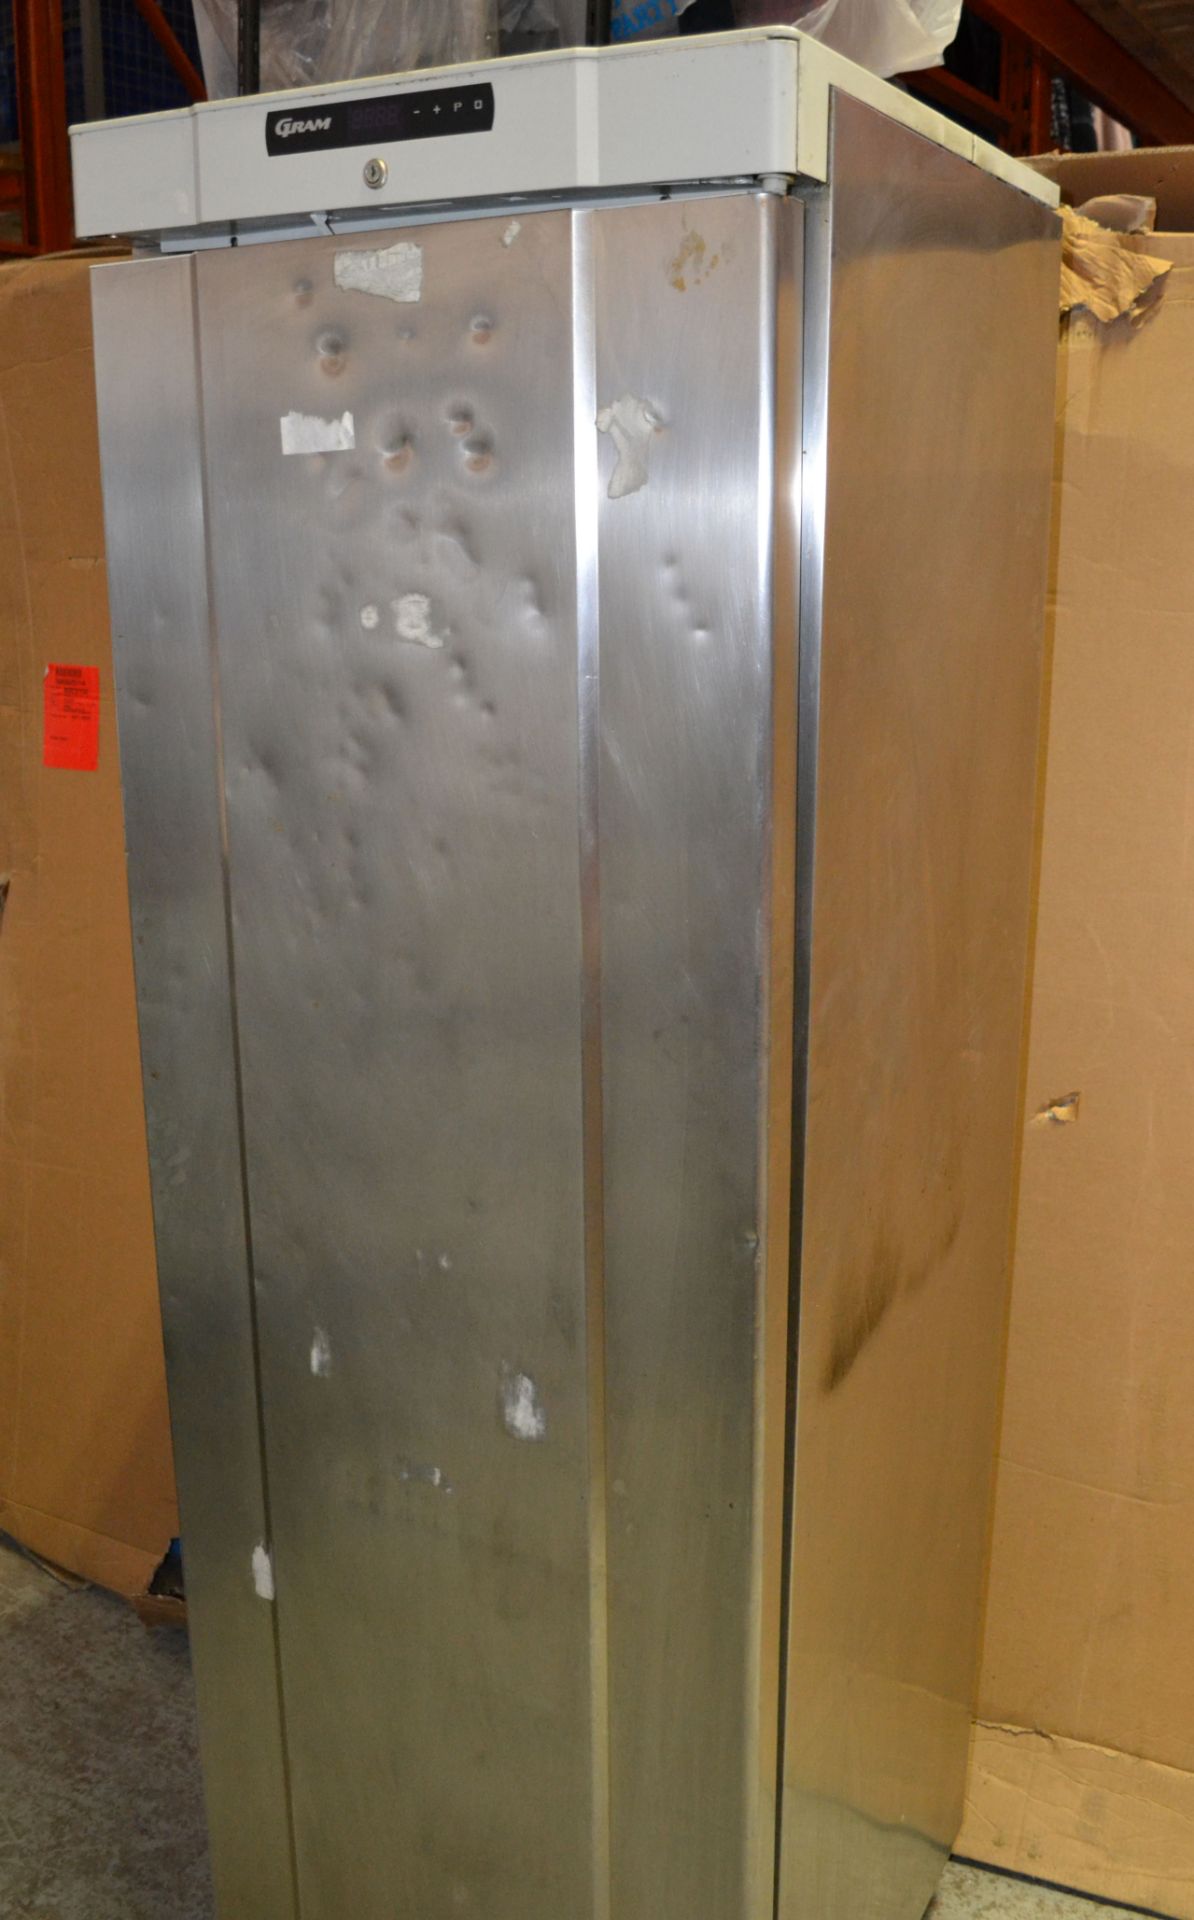 1 x Gram Tall Upright Commercial Freezer - 60x605x190cm - Ref: HM206 - CL261 - Location: - Image 2 of 10